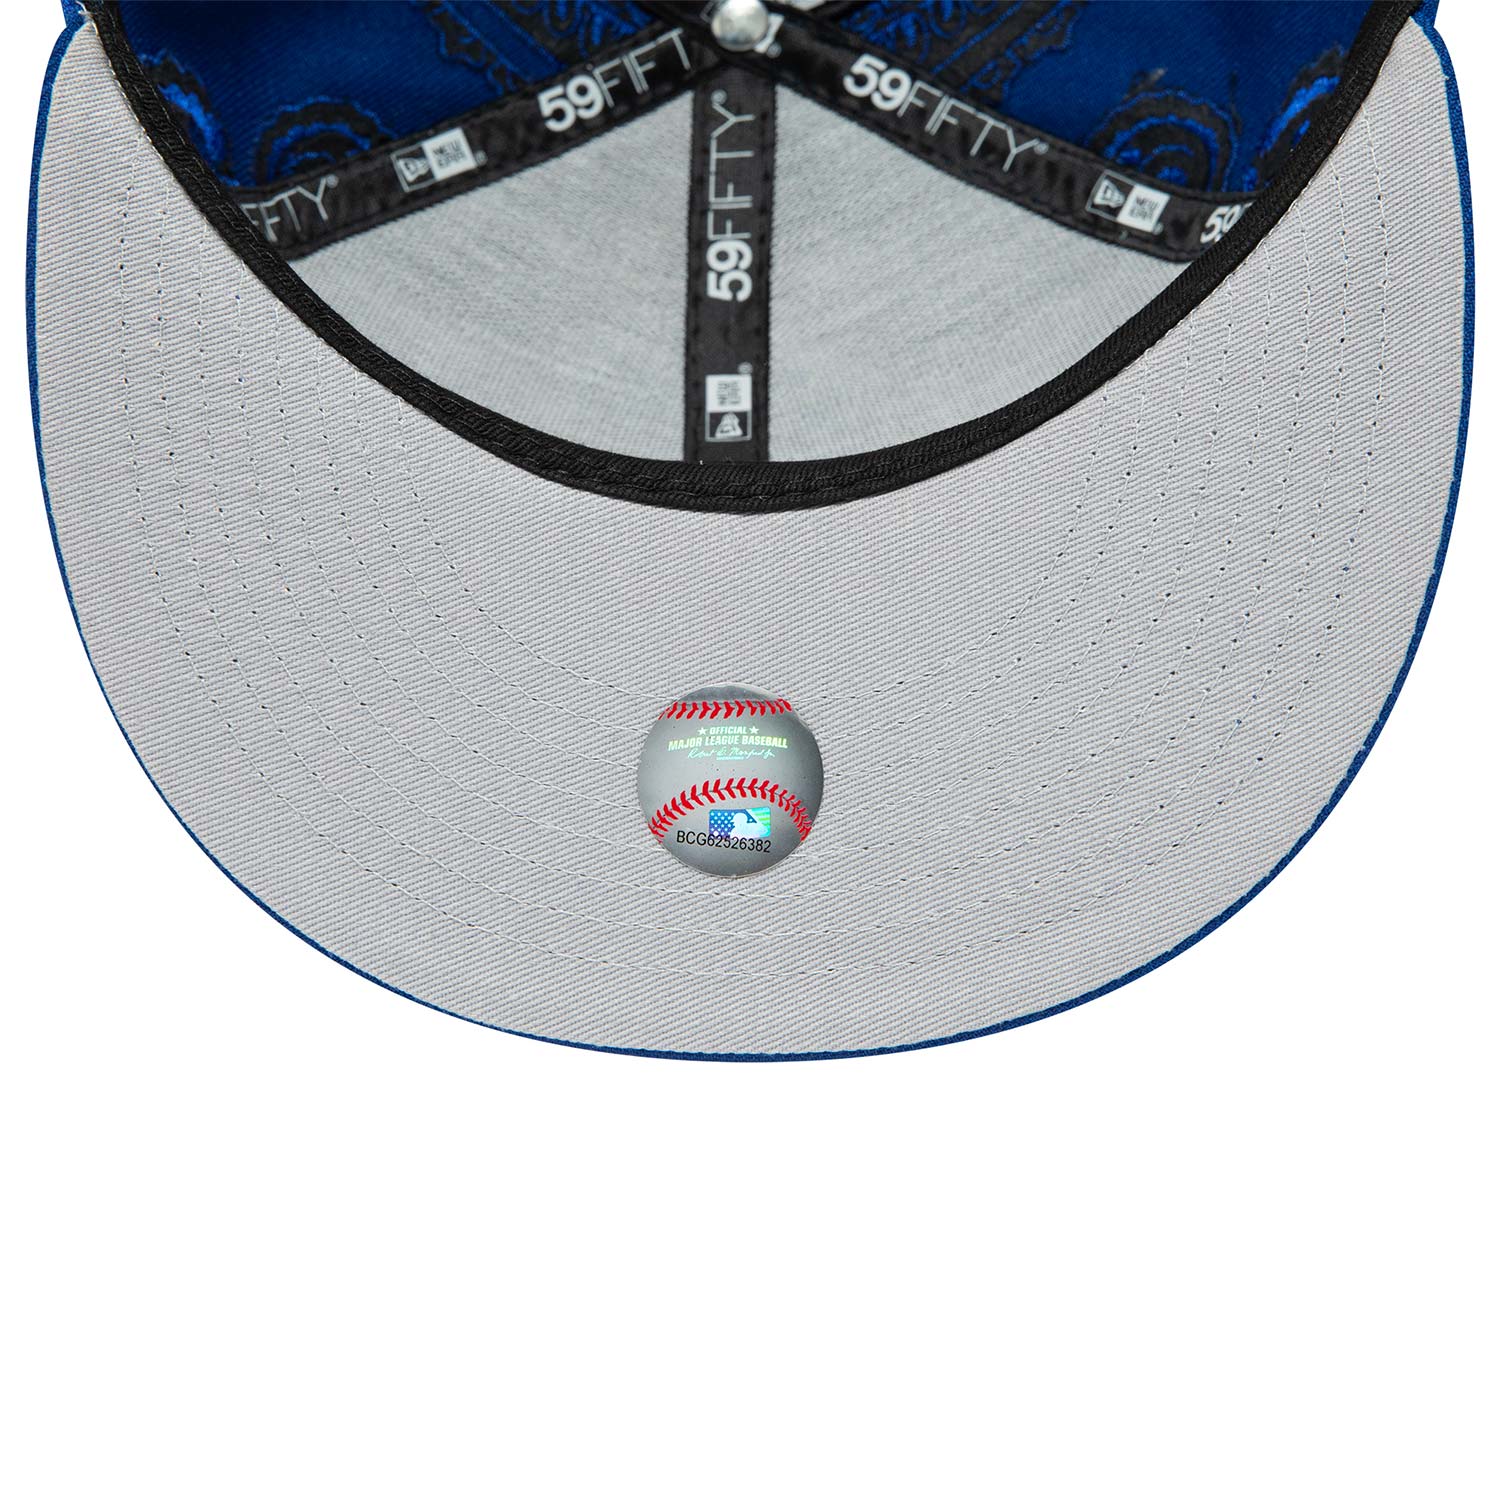 Cappellino 59FIFTY Fitted Chicago Cubs MLB Swirl Blu